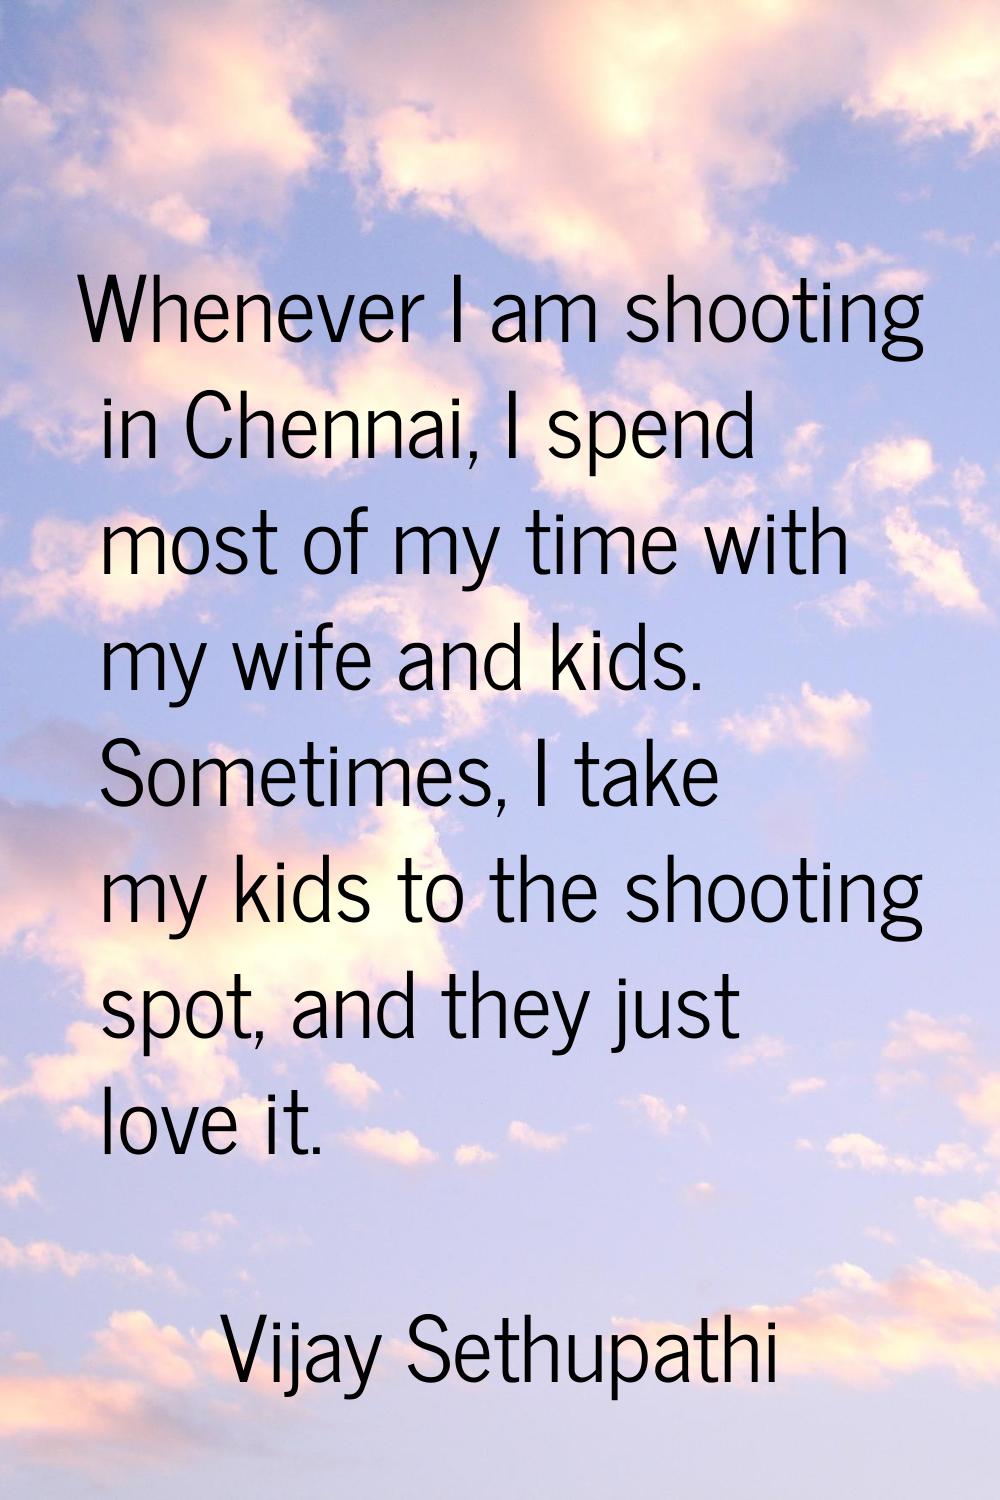 Whenever I am shooting in Chennai, I spend most of my time with my wife and kids. Sometimes, I take